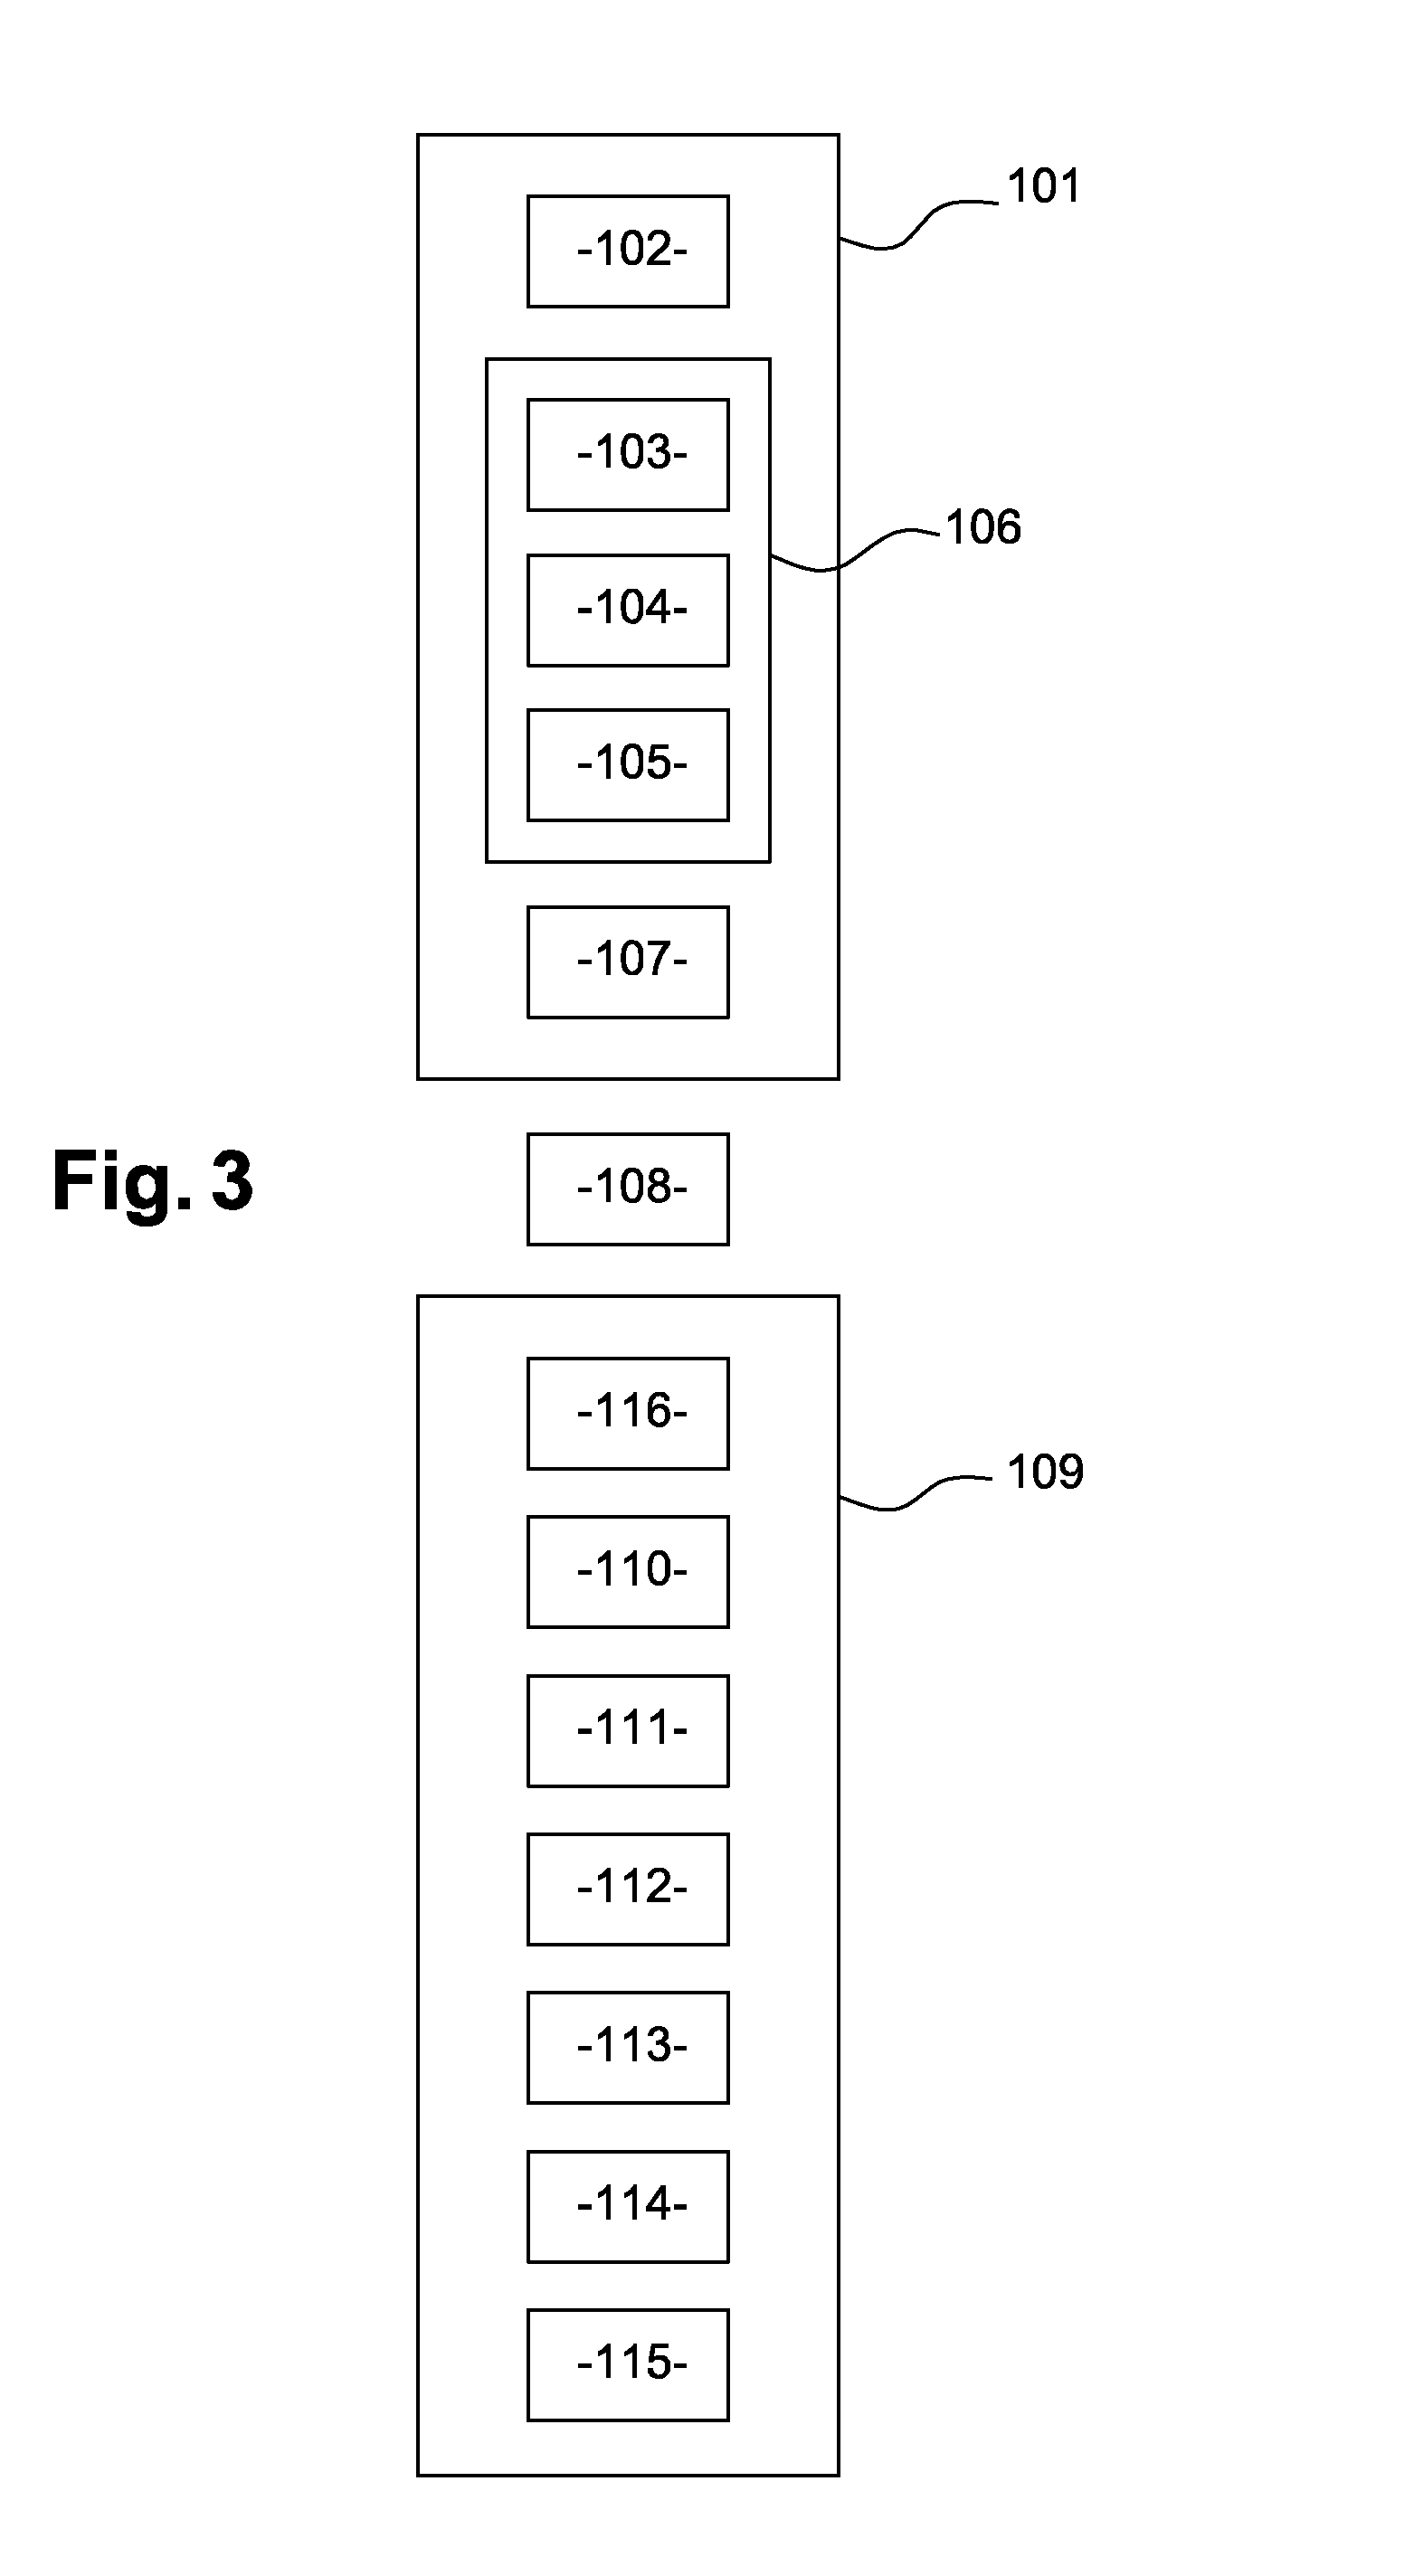 Method and system to perform secure boolean search over encrypted documents